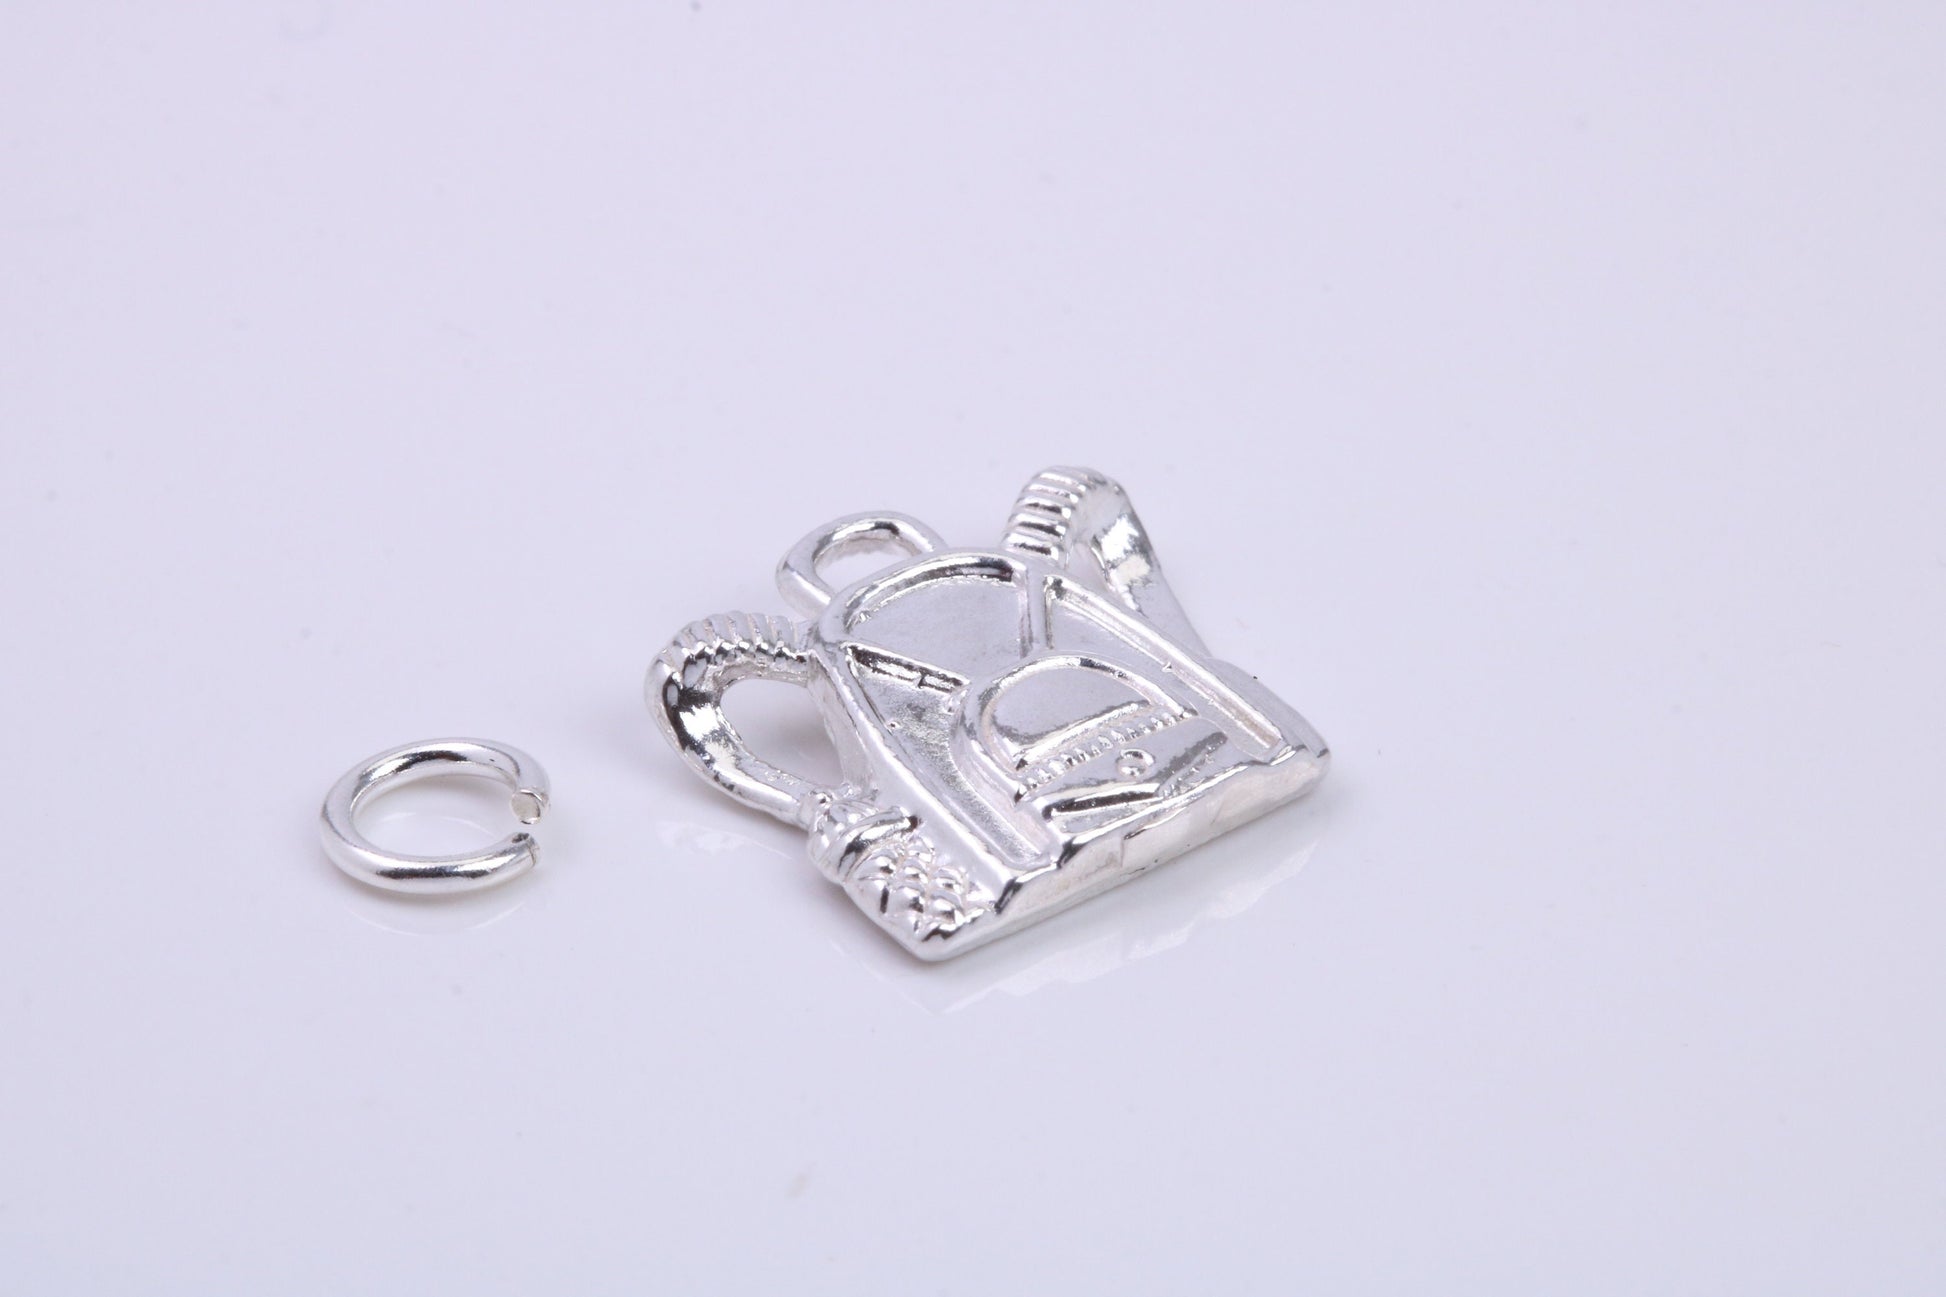 Back Pack Charm, Traditional Charm, Made from Solid 925 Grade Sterling Silver, Complete with Attachment Link